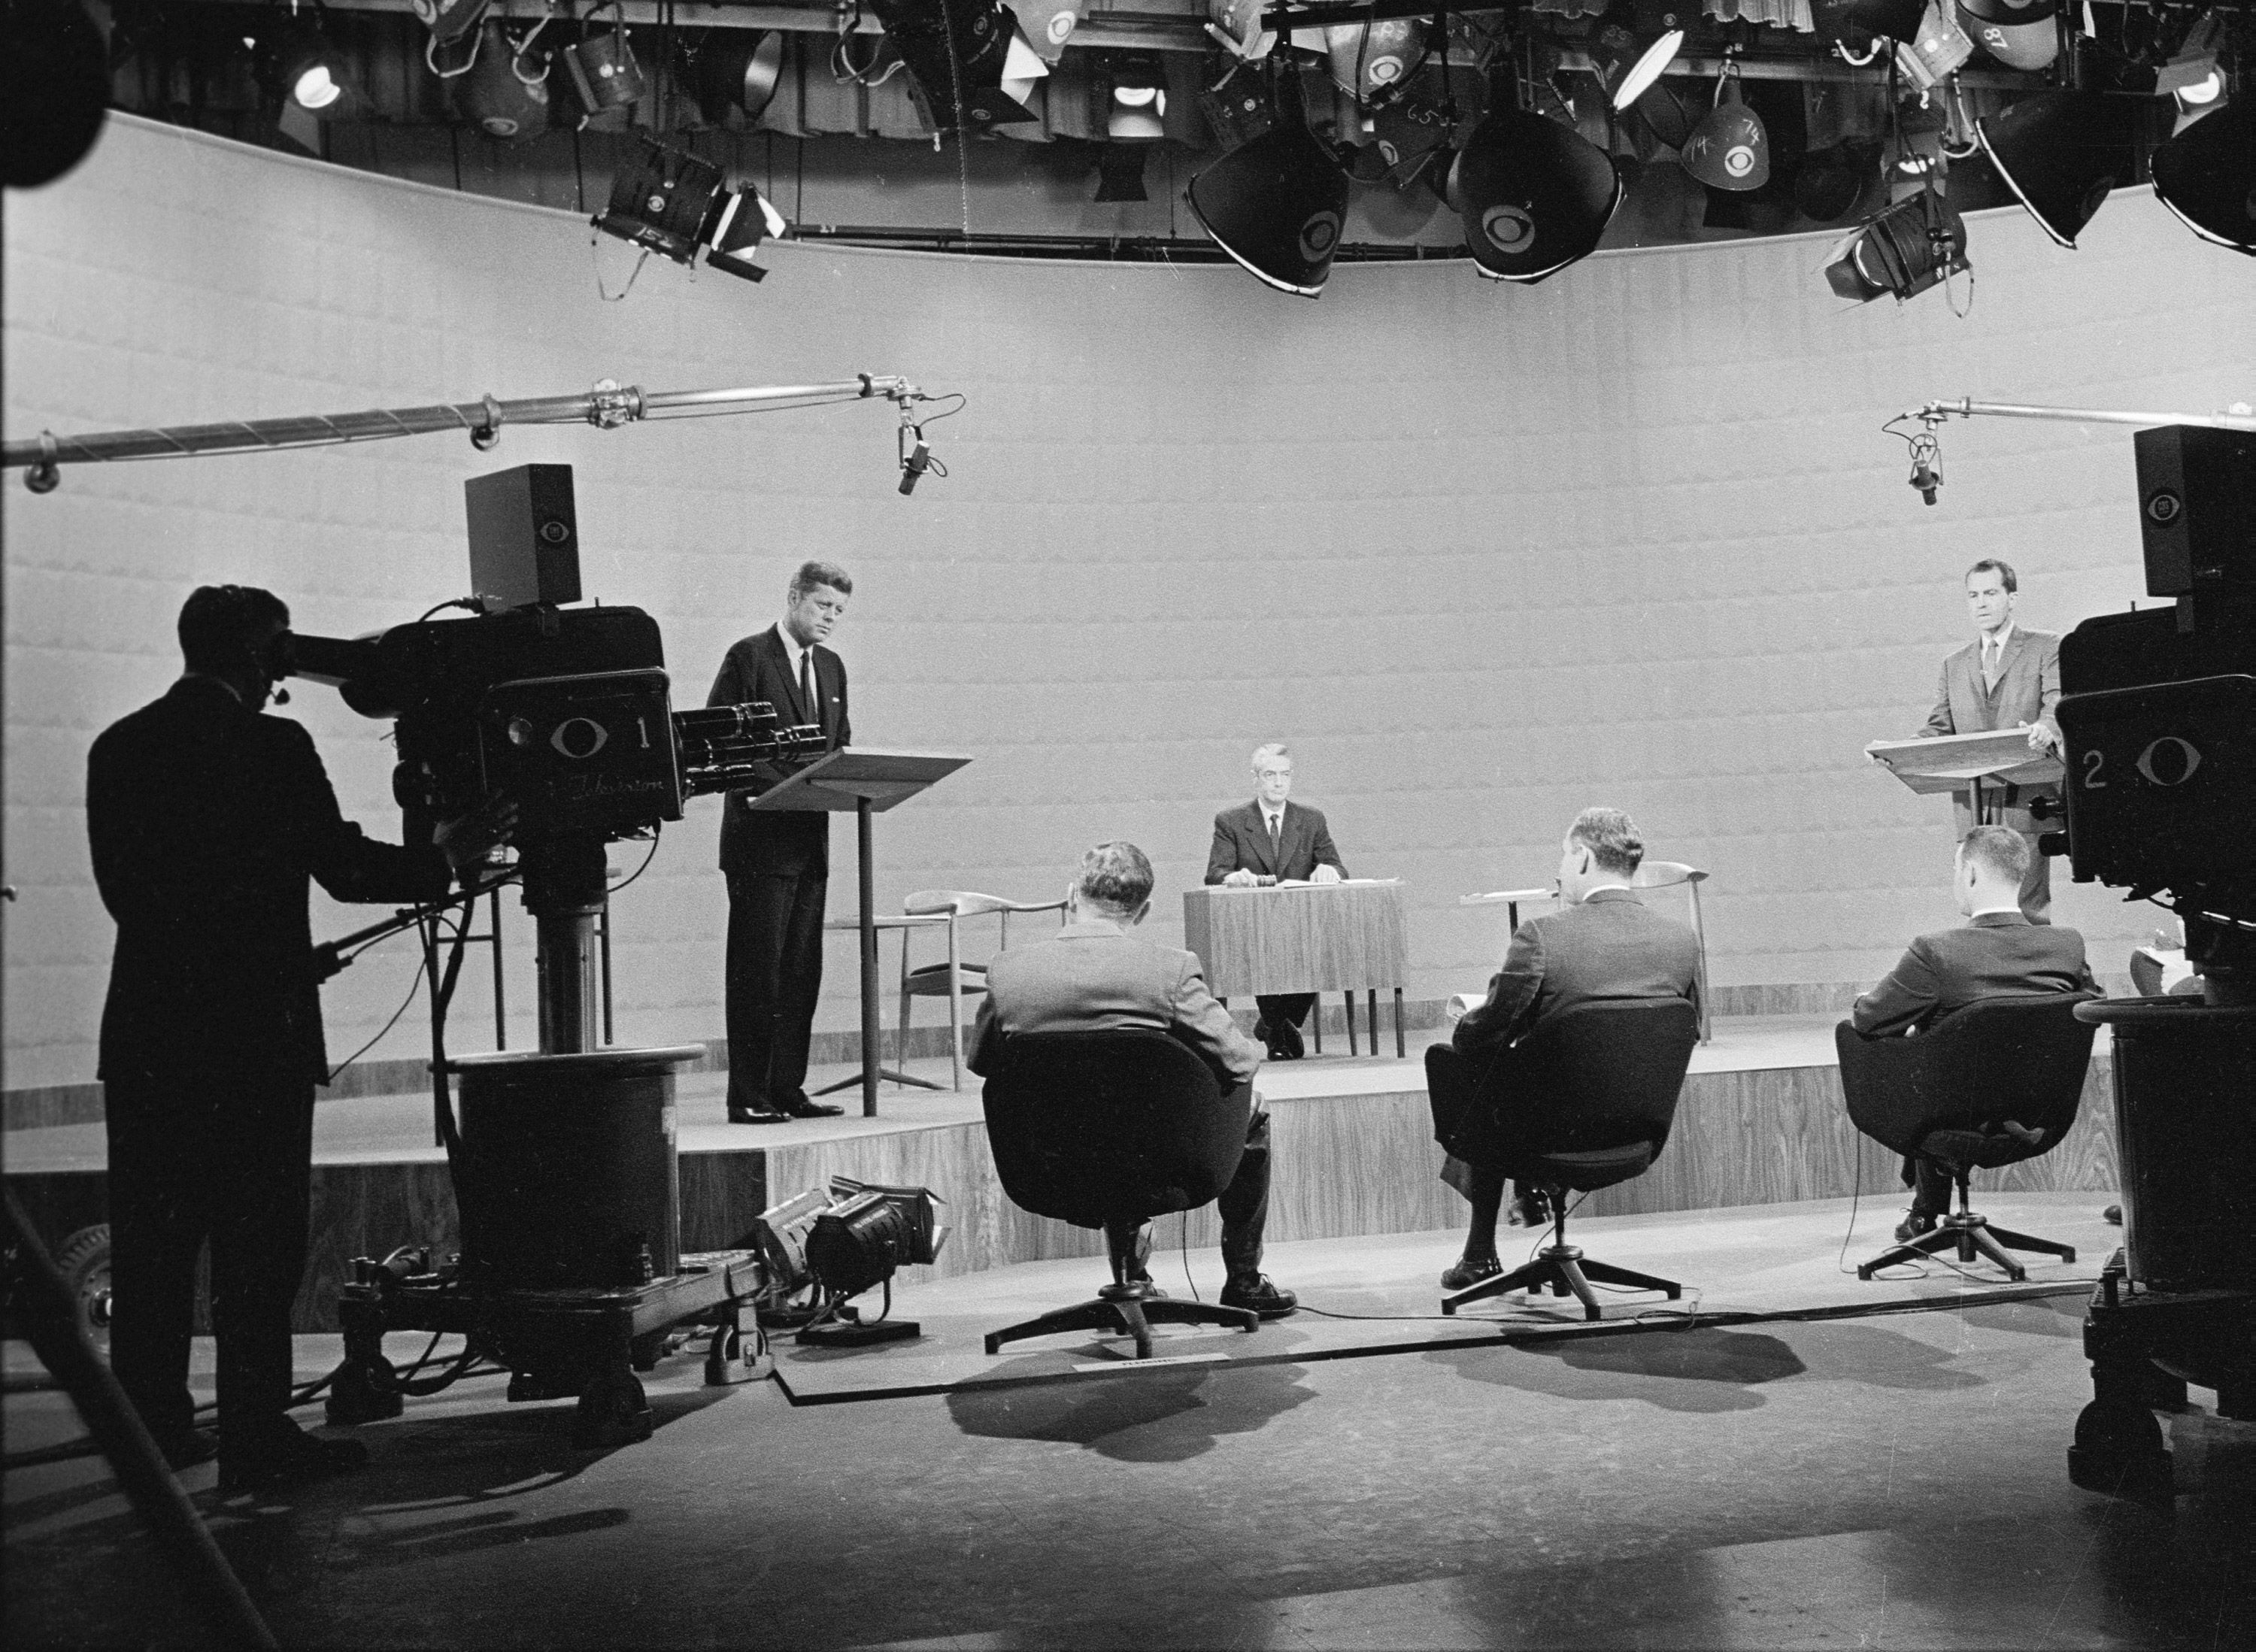 John F. Kennedy, left, speaks during his first presidential debate with Vice President Richard Nixon in 1960. The one-hour debate was moderated by news anchor Howard K. Smith. It started with eight-minute opening statements and then moved on to alternating questions from panelists, seen here in the foreground.